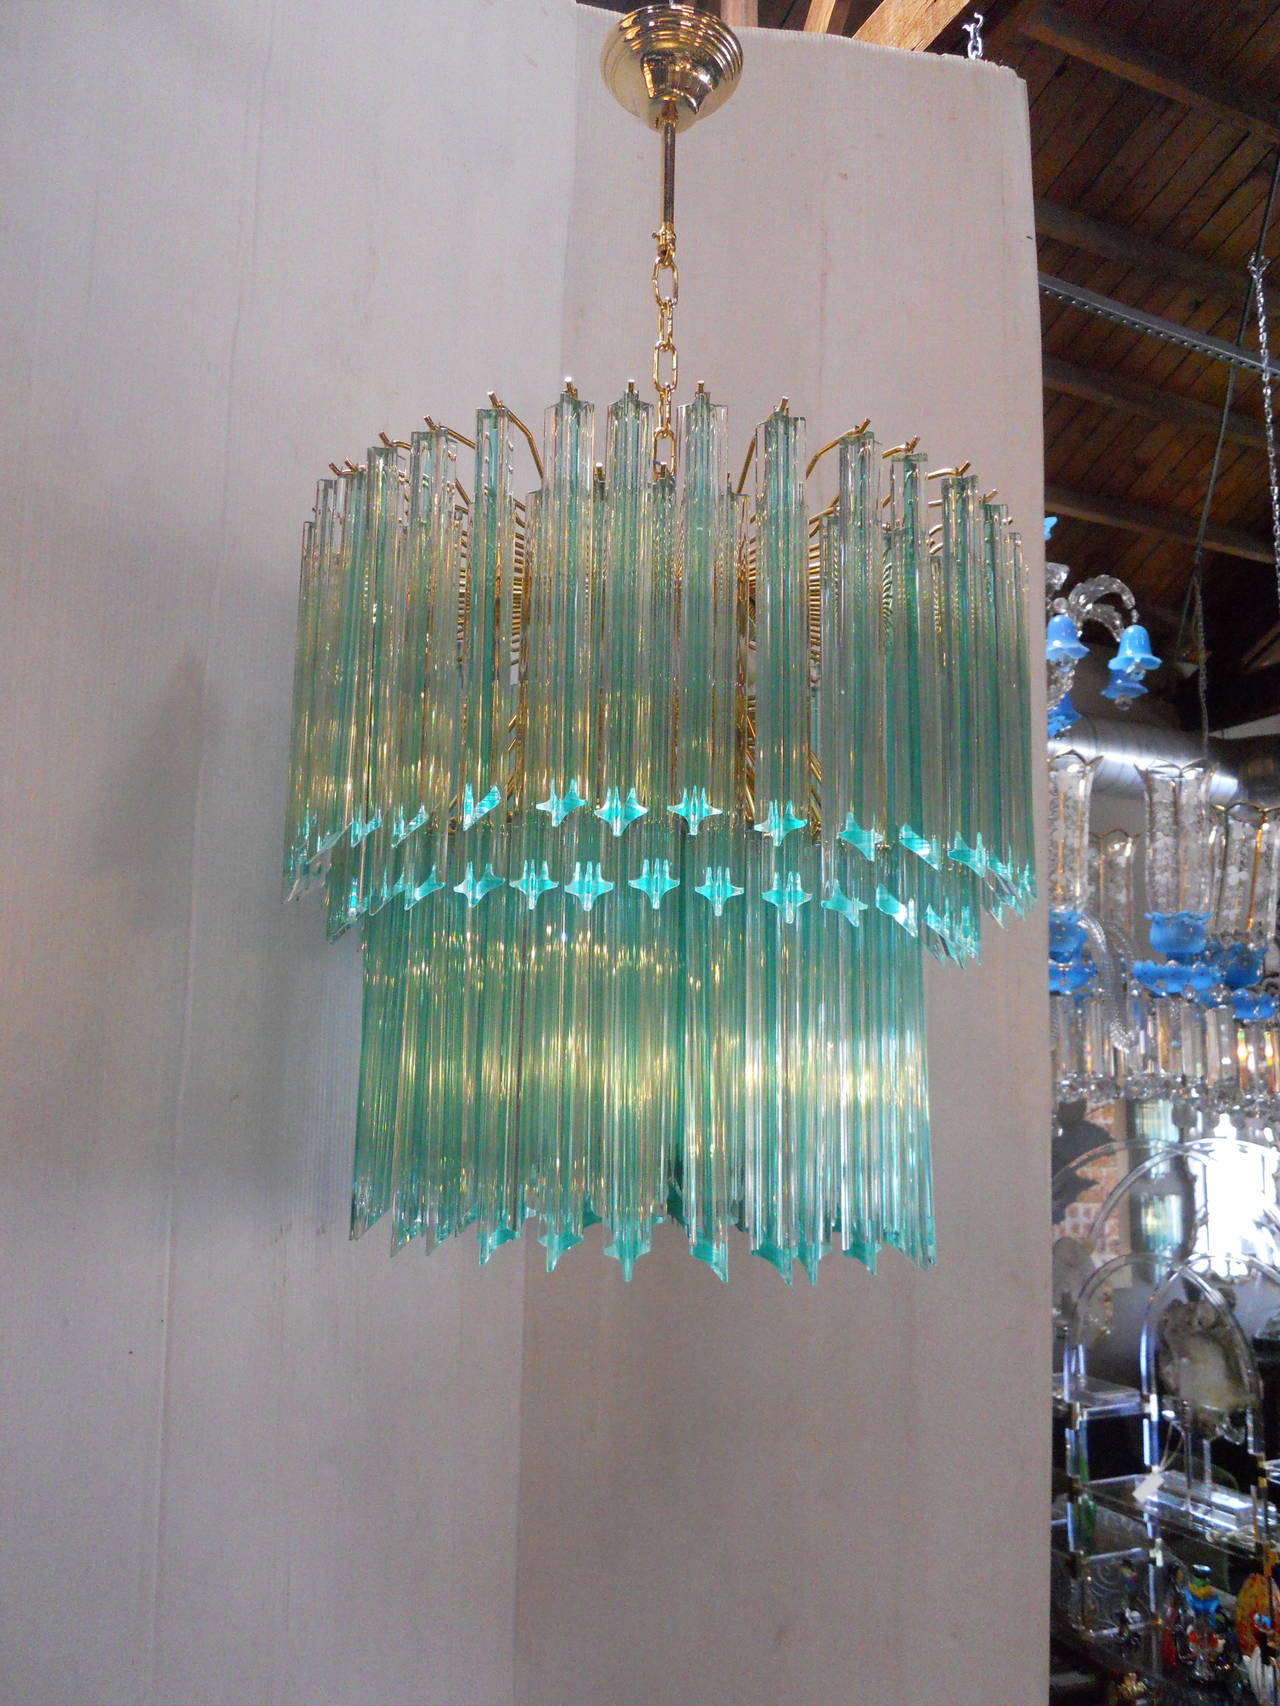 Lovely pair of Venini aquamarine chandeliers.
Purchased from The President Hotel, Brescia, Italy. The hotel was opened in 1960 and closed in fall of 2013.
The measurements of the chandelier mentioned below is just for the body of the chandelier.